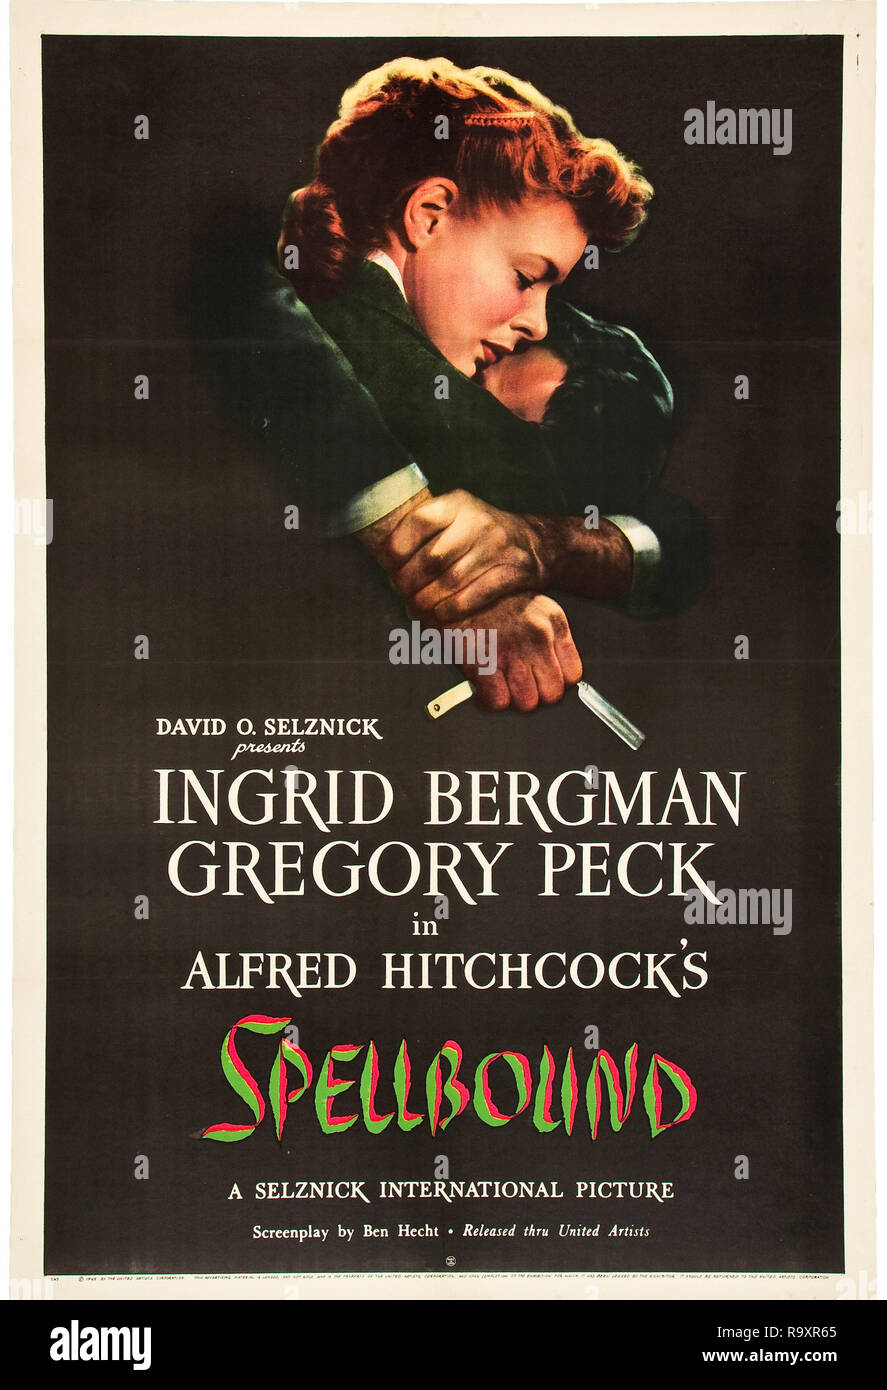 Spellbound (United Artists, 1945).  Poster  Ingrid Bergman  File Reference # 33635 964THA Stock Photo